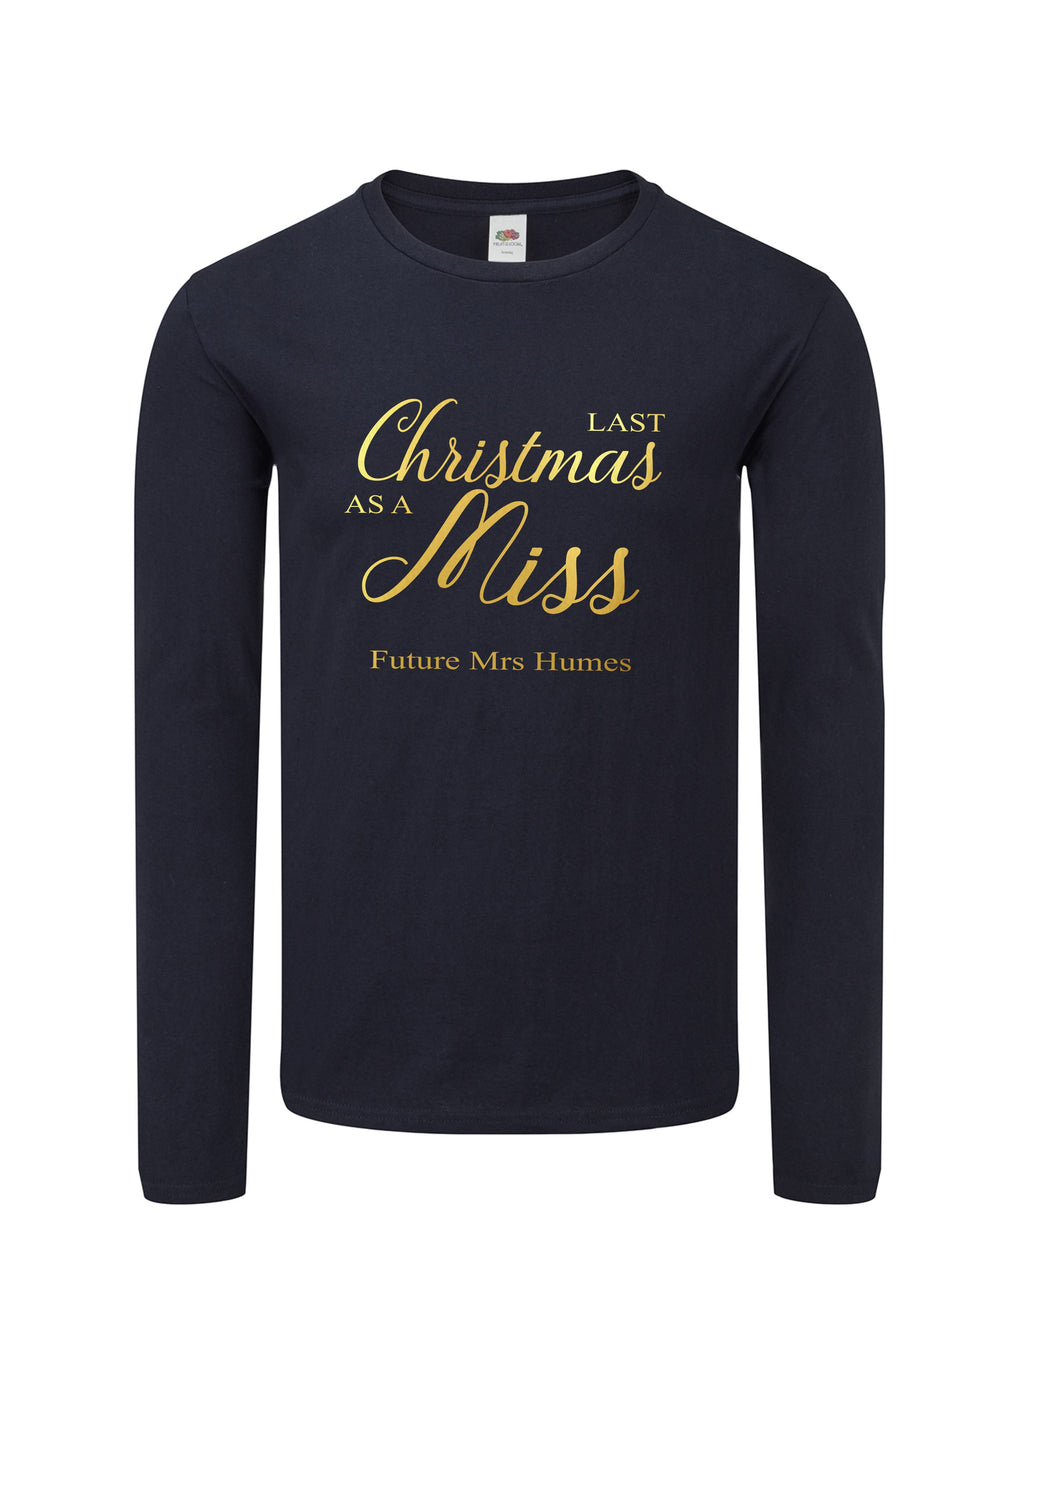 Personalised Last Christmas as a Miss print long sleeve top- your surname - navy/gold